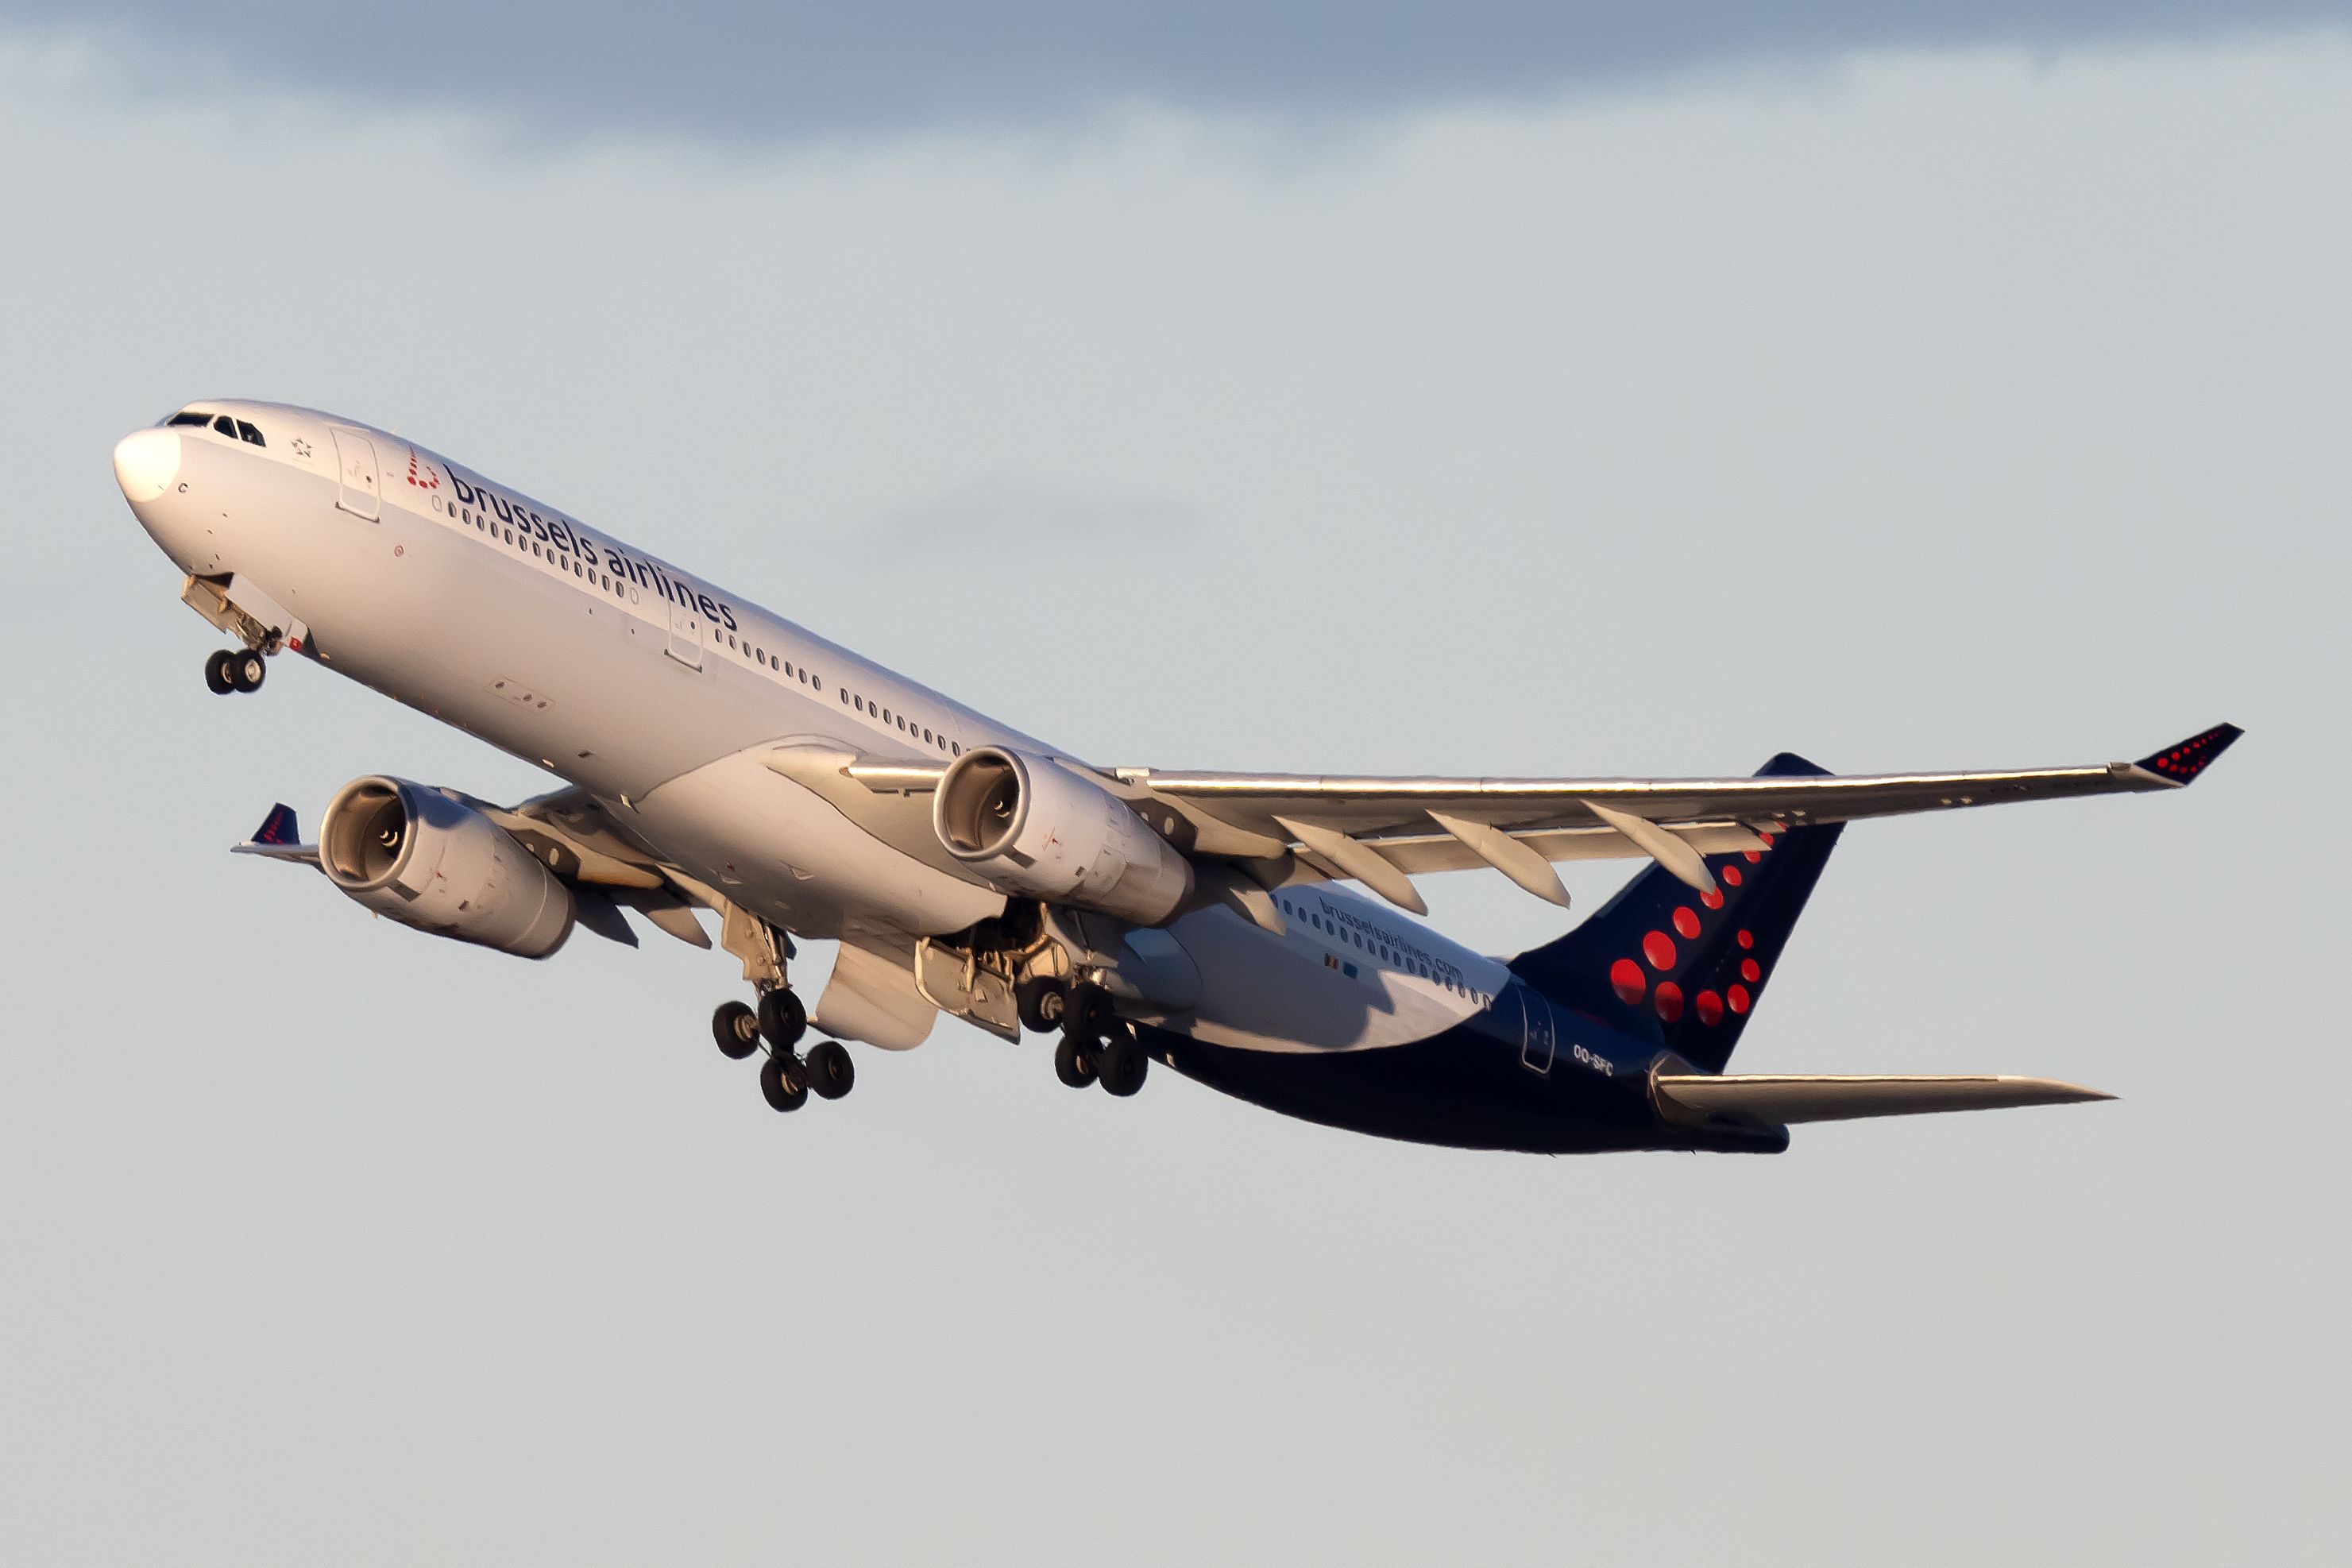 Brussels Airlines Airbus A330-300